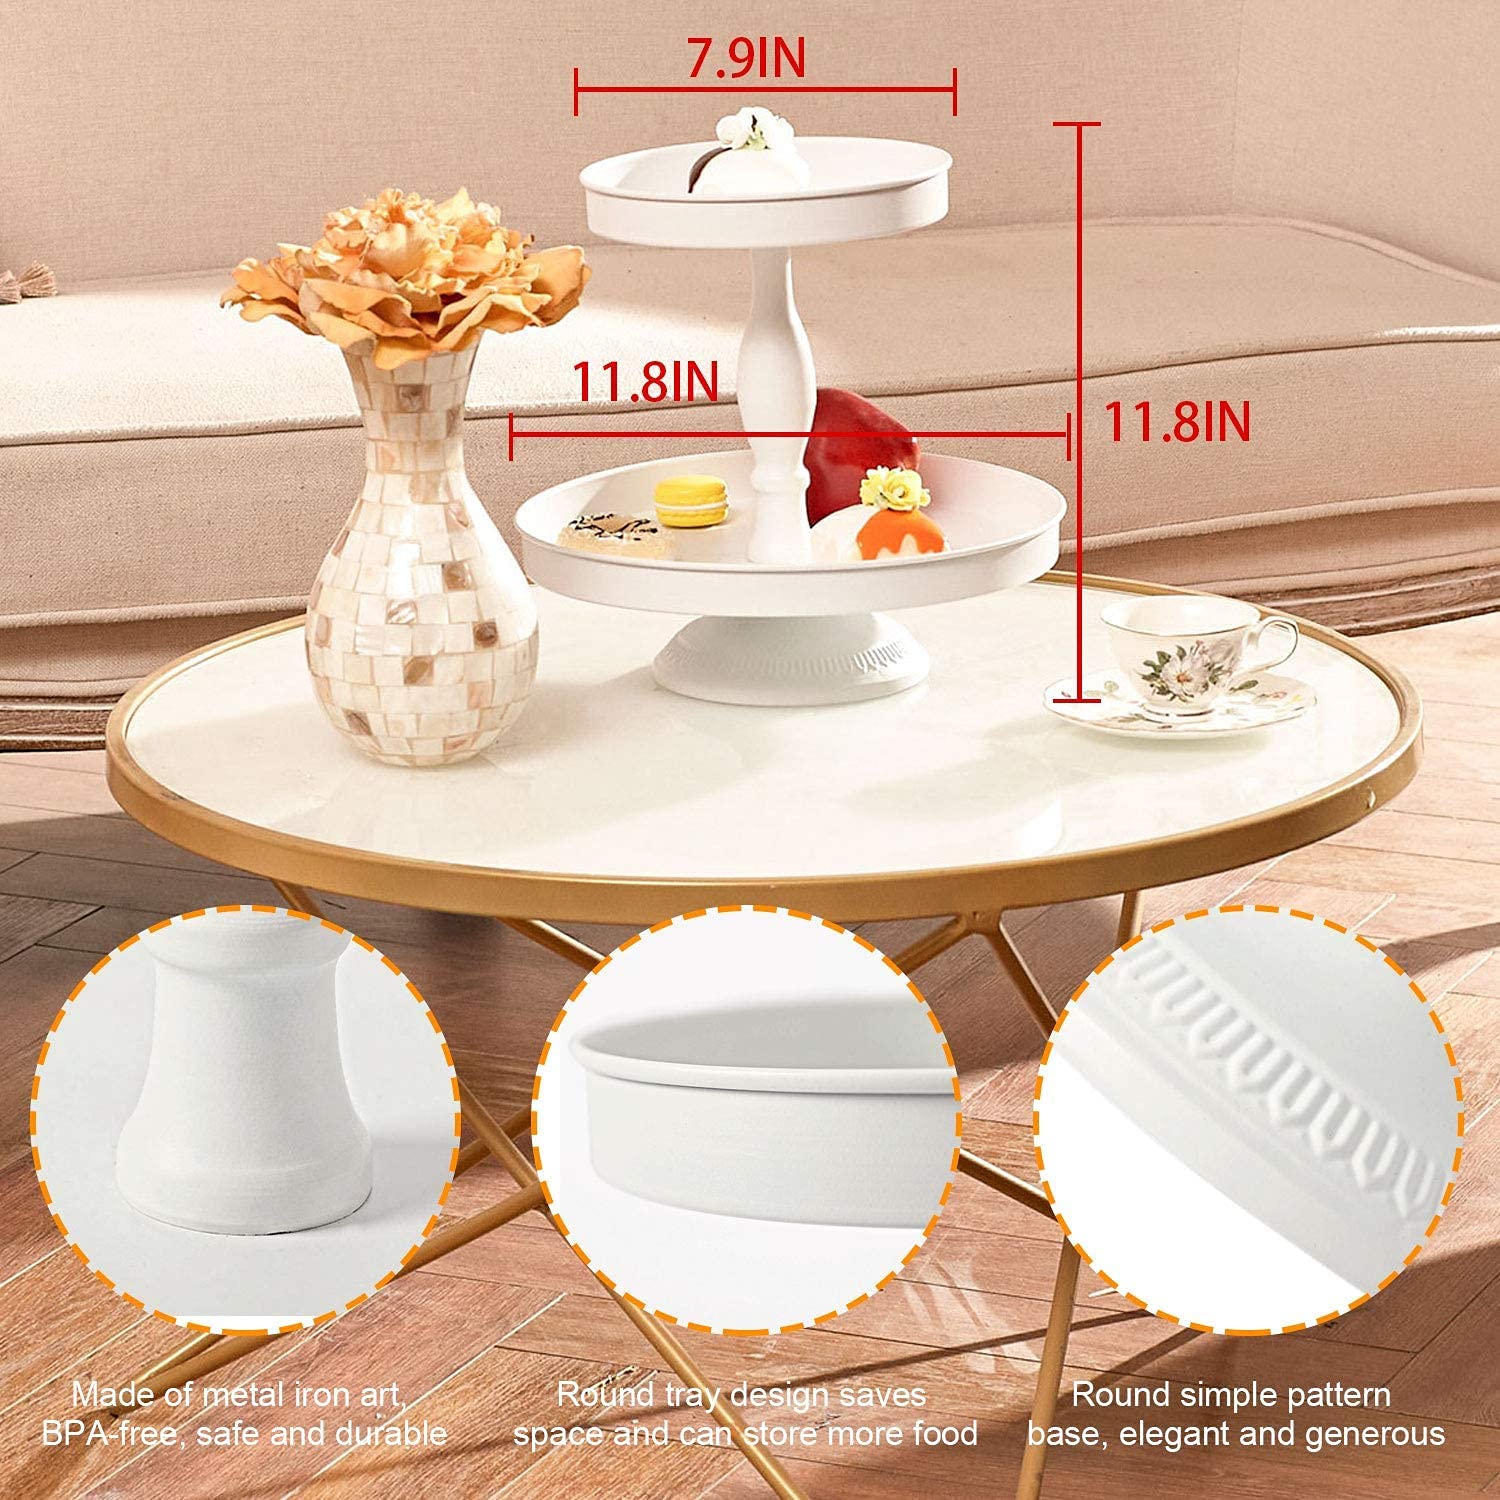 Donosura 2 Tier Tray, White Cupcake Stand Easter Tiered Tray Decor Stands Metal Round Tiered Serving Tray Dessert Dispaly Cupcake Tower for Birthday Wedding Graduation Cememory Party